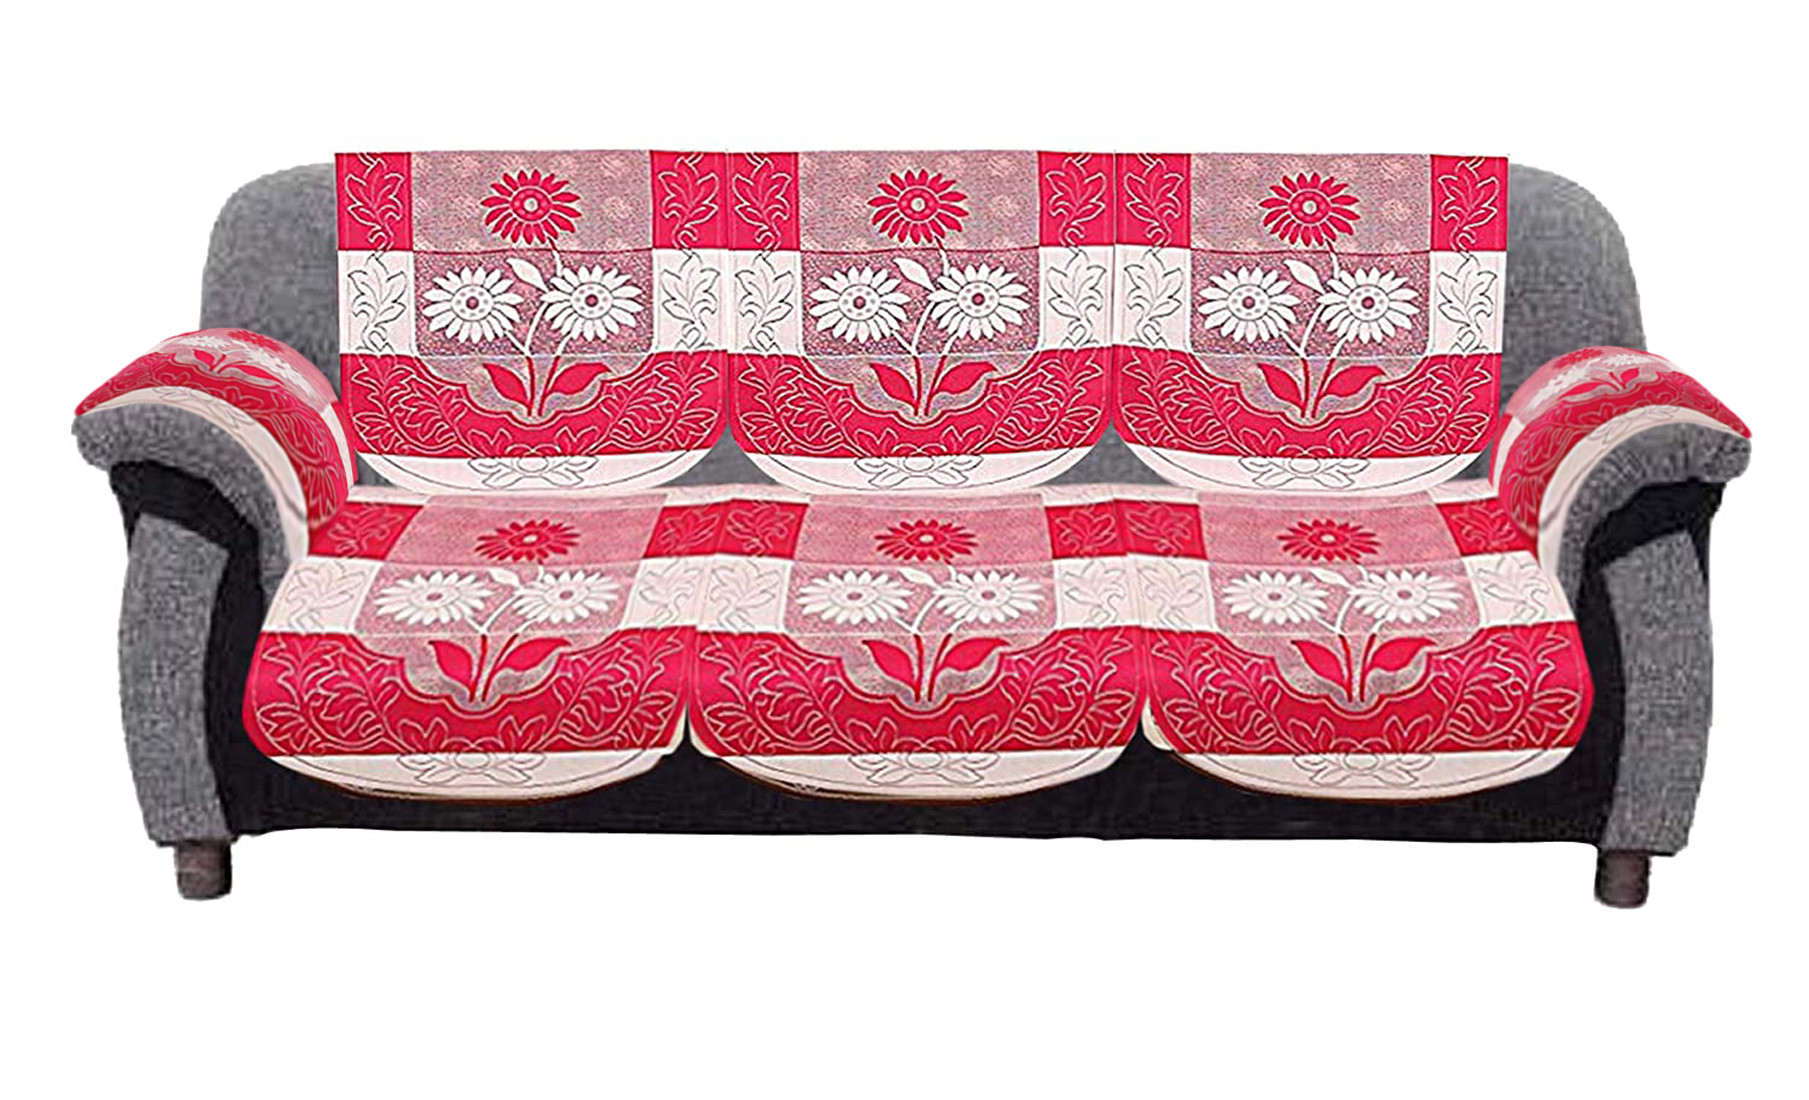 Kuber Industries Flower Design Cotton 5 Seater Sofa Cover With 6 Pieces Arms cover Use Both Side, Living Room, Drawing Room, Bedroom, Guest Room (Set Of16, Pink)-KUBMRT11965